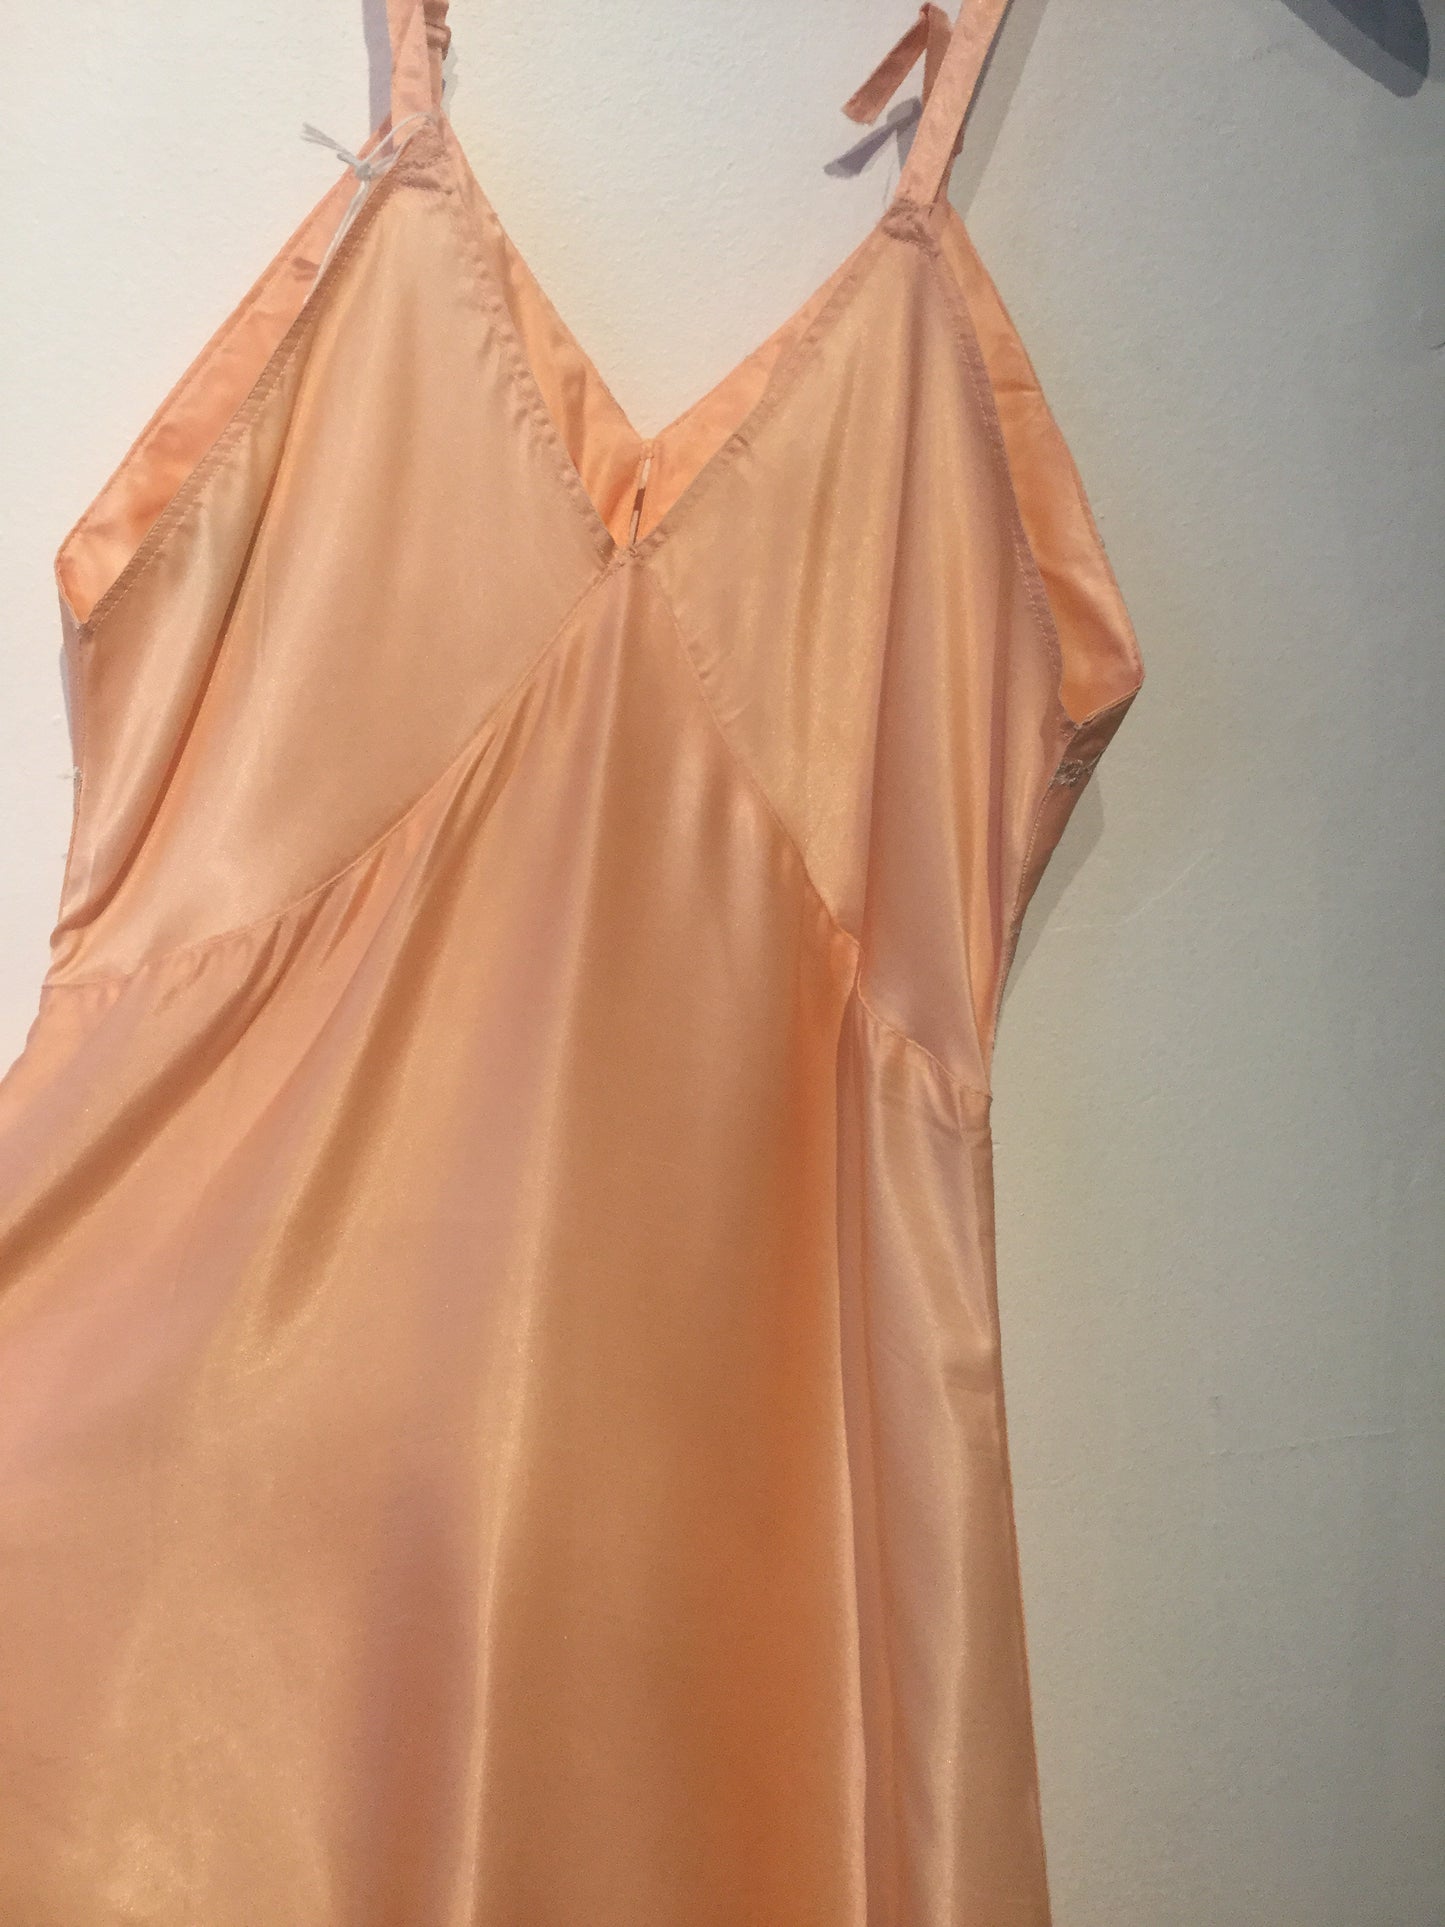 Embroidered Bust Peachy Peach Slip XS/S #077